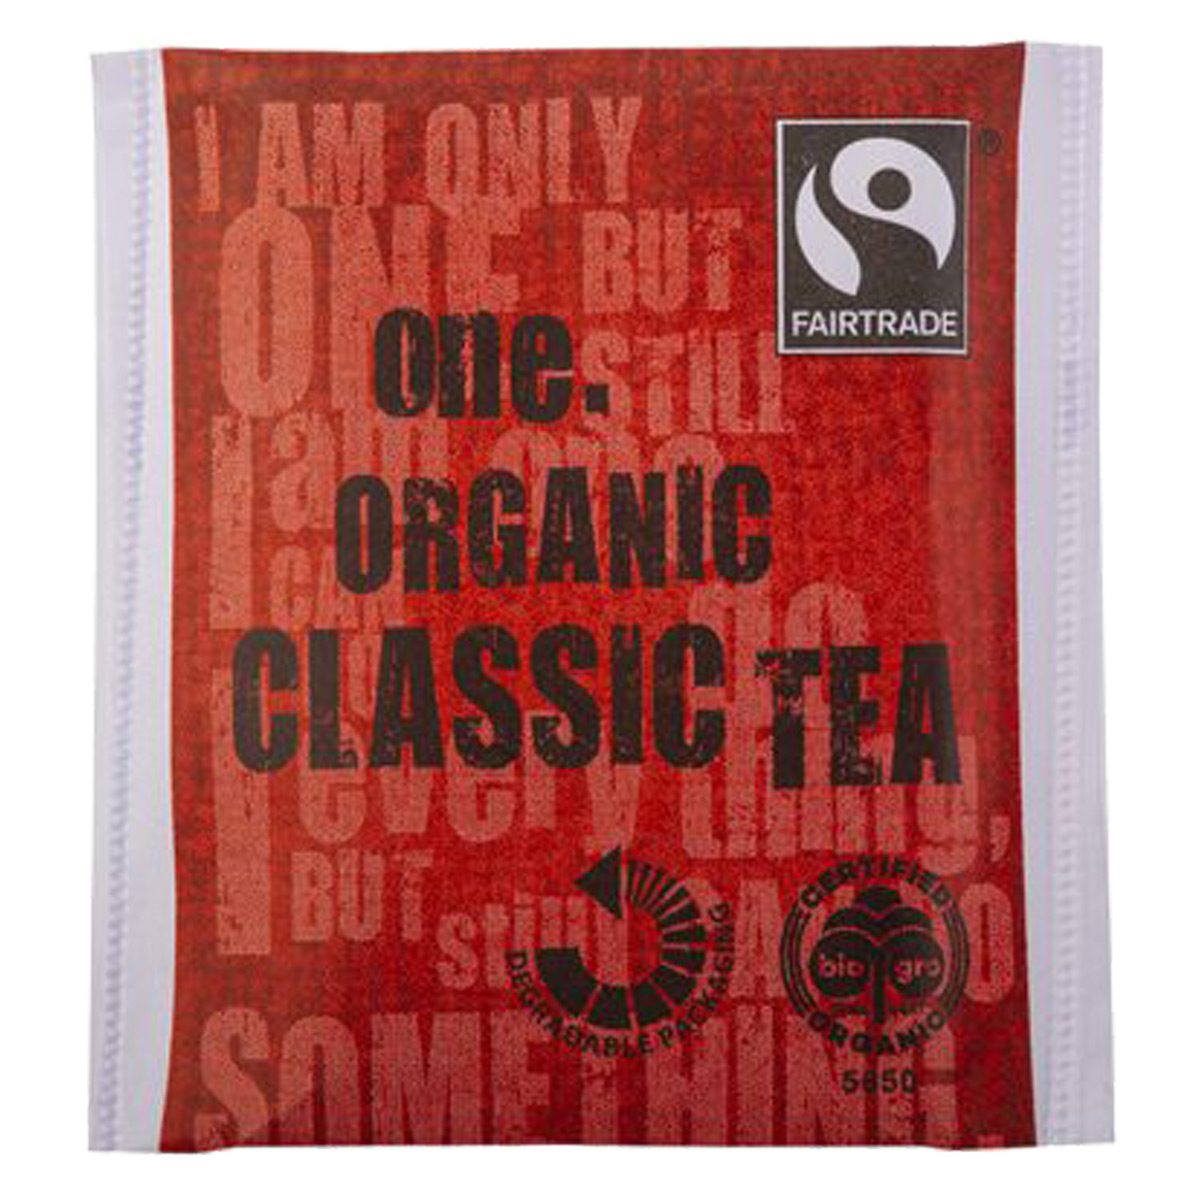 consumables-hospitality-beverage-food-one-fairtrade-wrapped-tea-bags-x500pk-blended-tea-certifide-organic-fairtrade-truly-guilt-free-cuppa-packaging-plastic-foil-paper-cotton-free-vjs-distributors-ONET